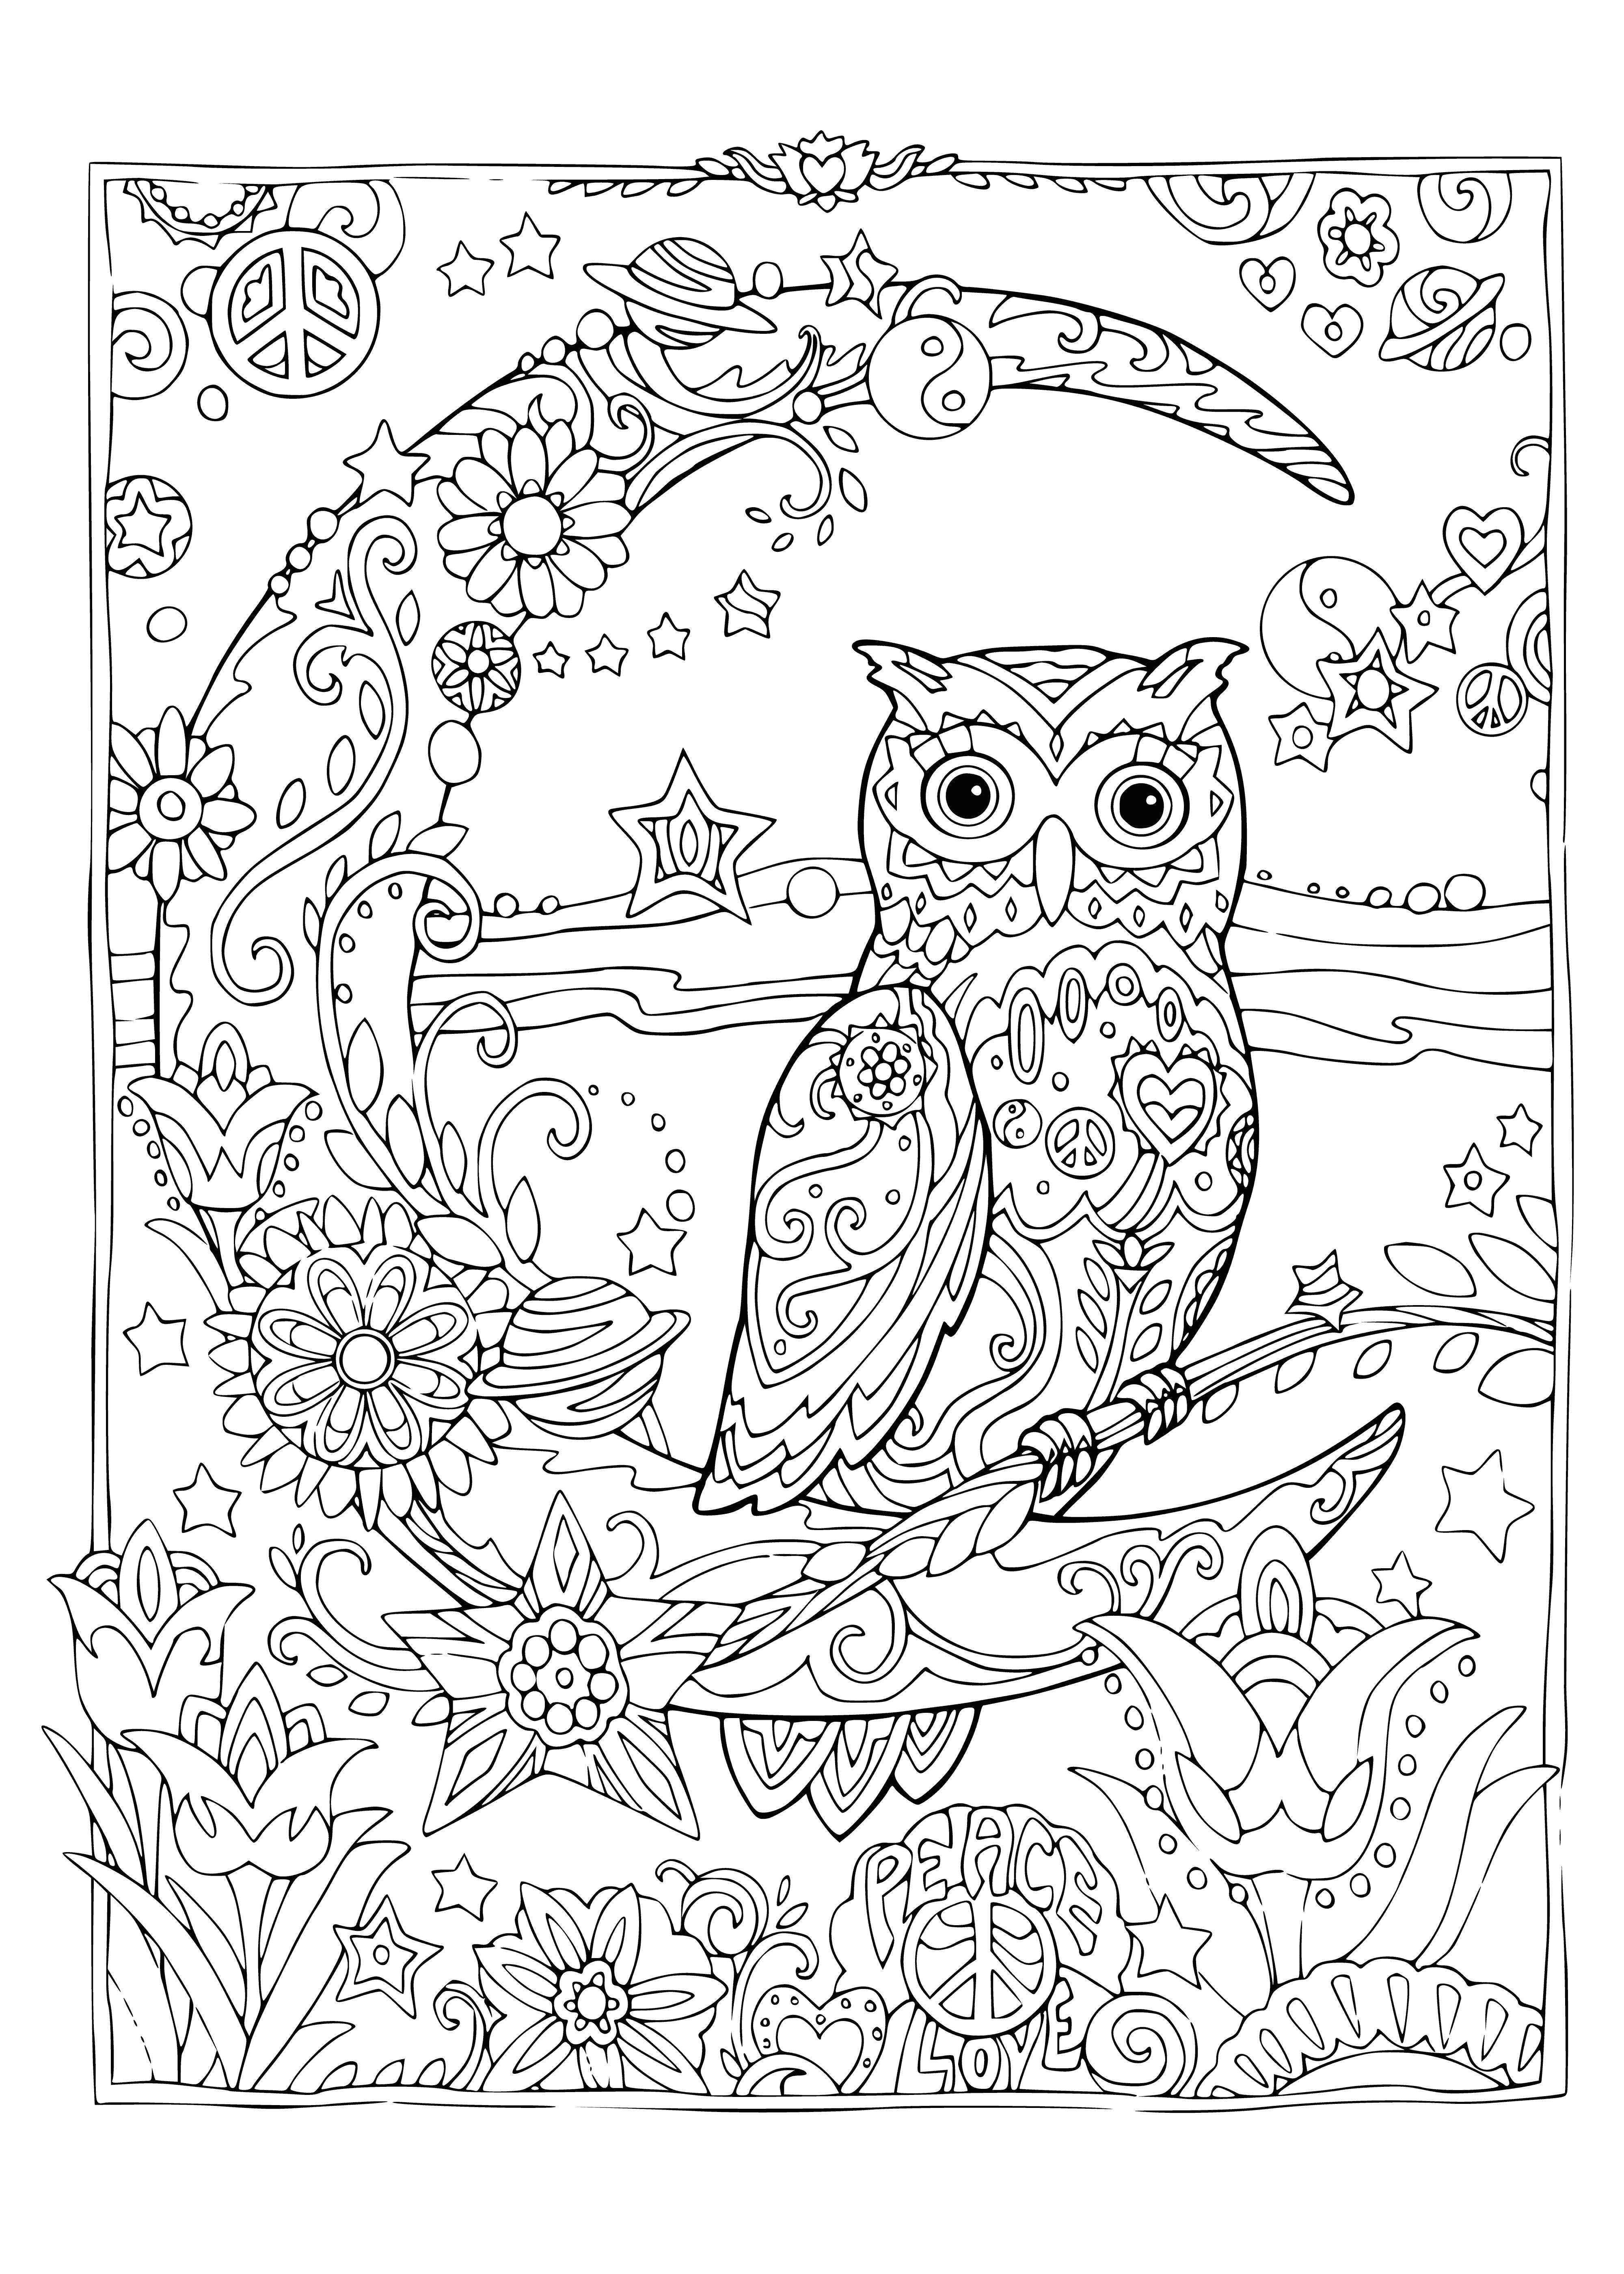 coloring page: A light blue owl with yellow eyes, an orange beak and red, orange, and yellow leaves sits on a tree branch with a brown trunk and a green background.